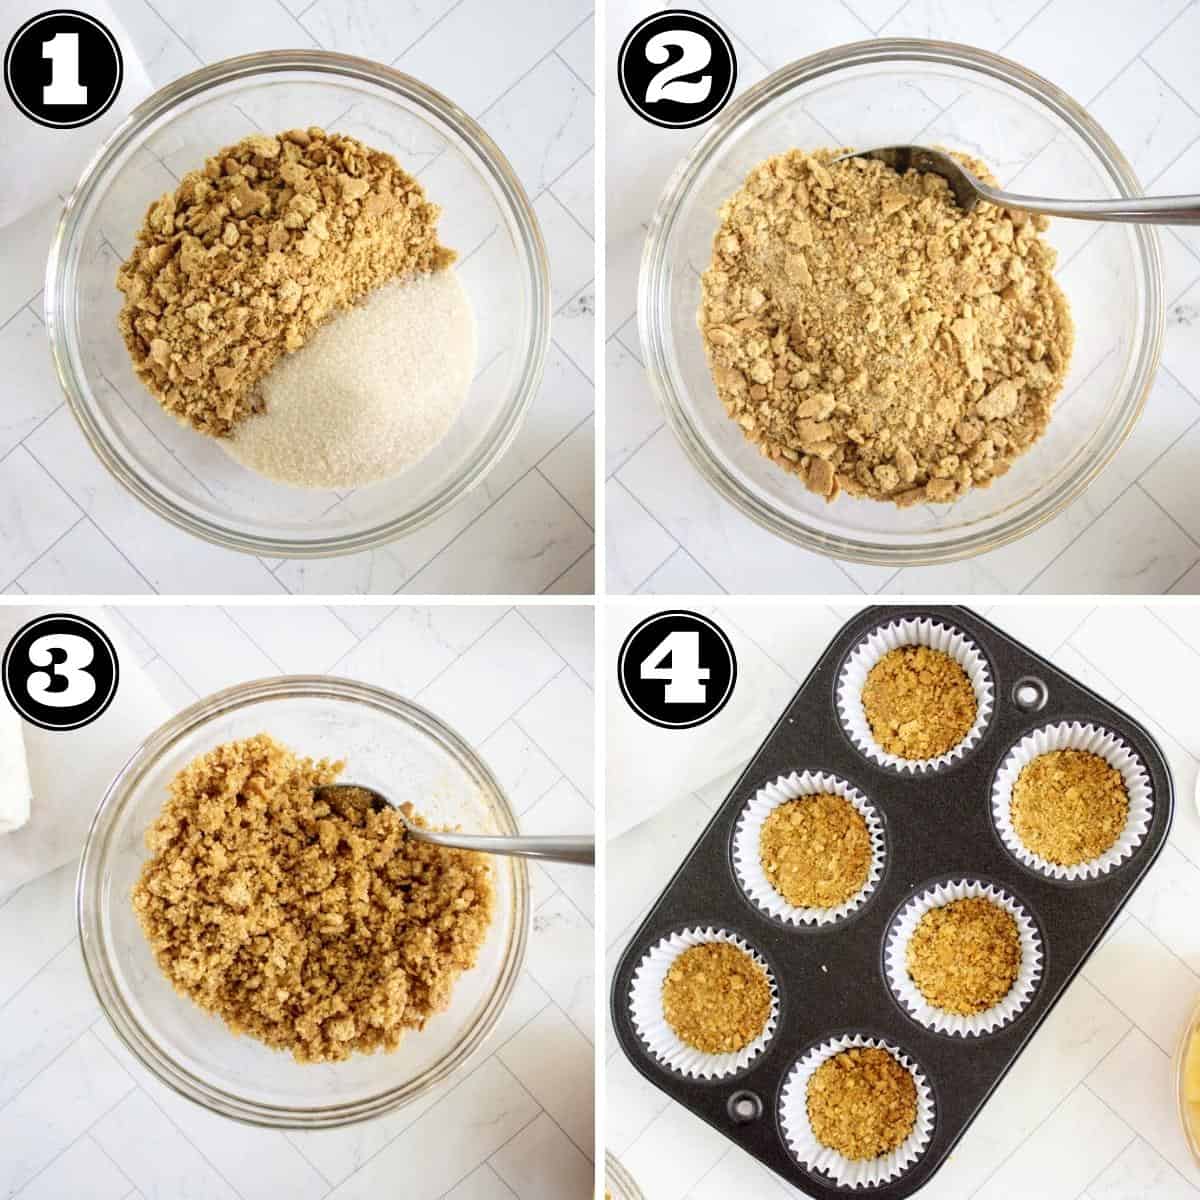 Collage image showing steps to make mini cheesecake crust.